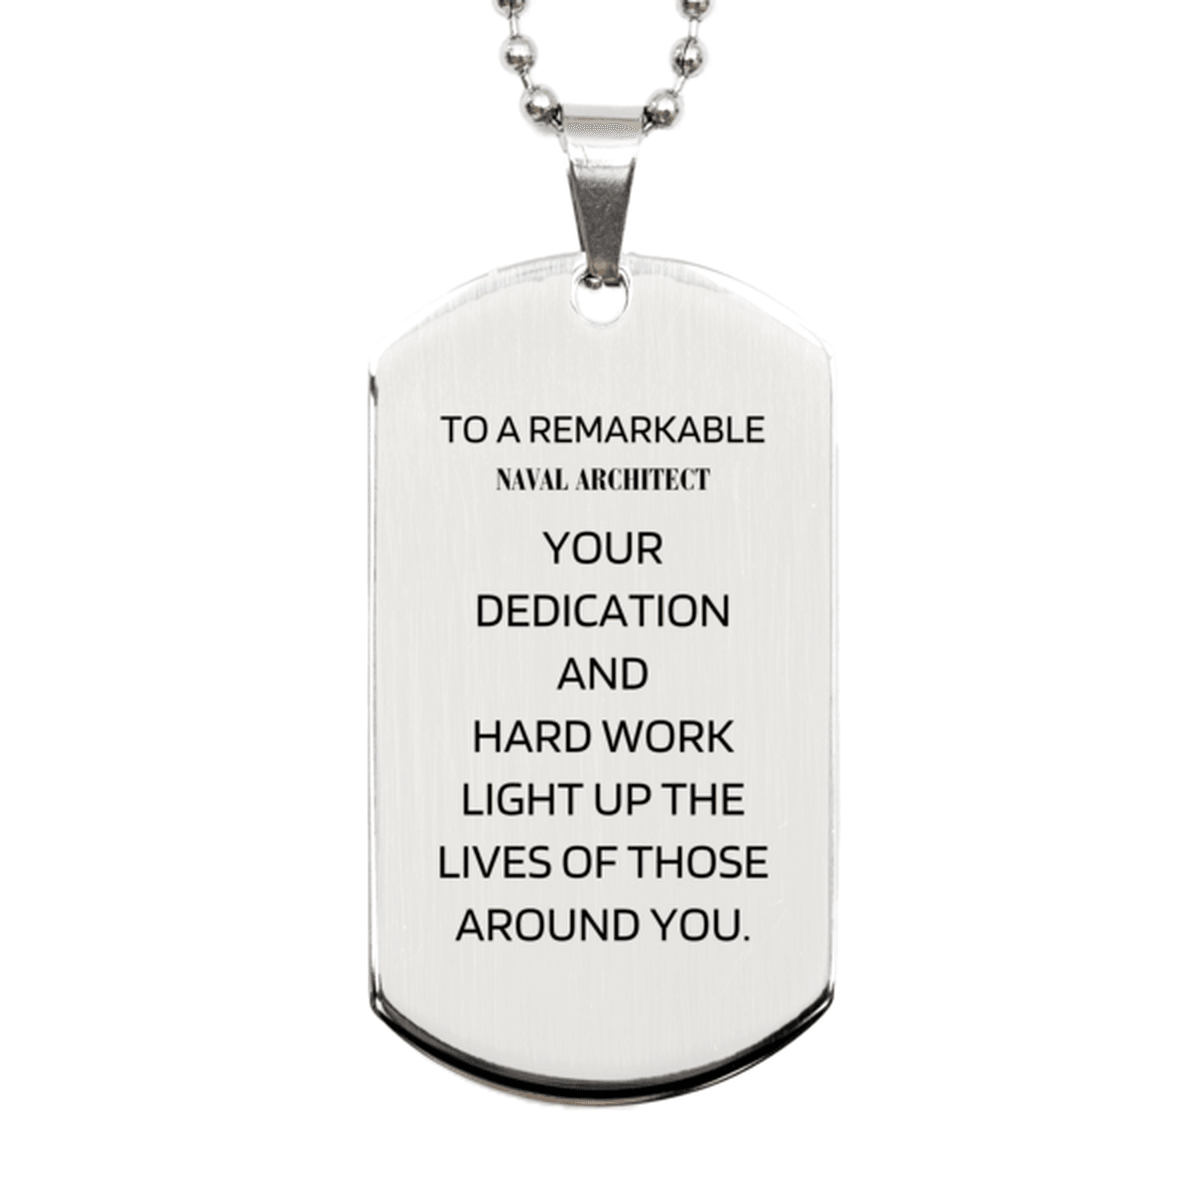 Remarkable Naval Architect Gifts, Your dedication and hard work, Inspirational Birthday Christmas Unique Silver Dog Tag For Naval Architect, Coworkers, Men, Women, Friends - Mallard Moon Gift Shop